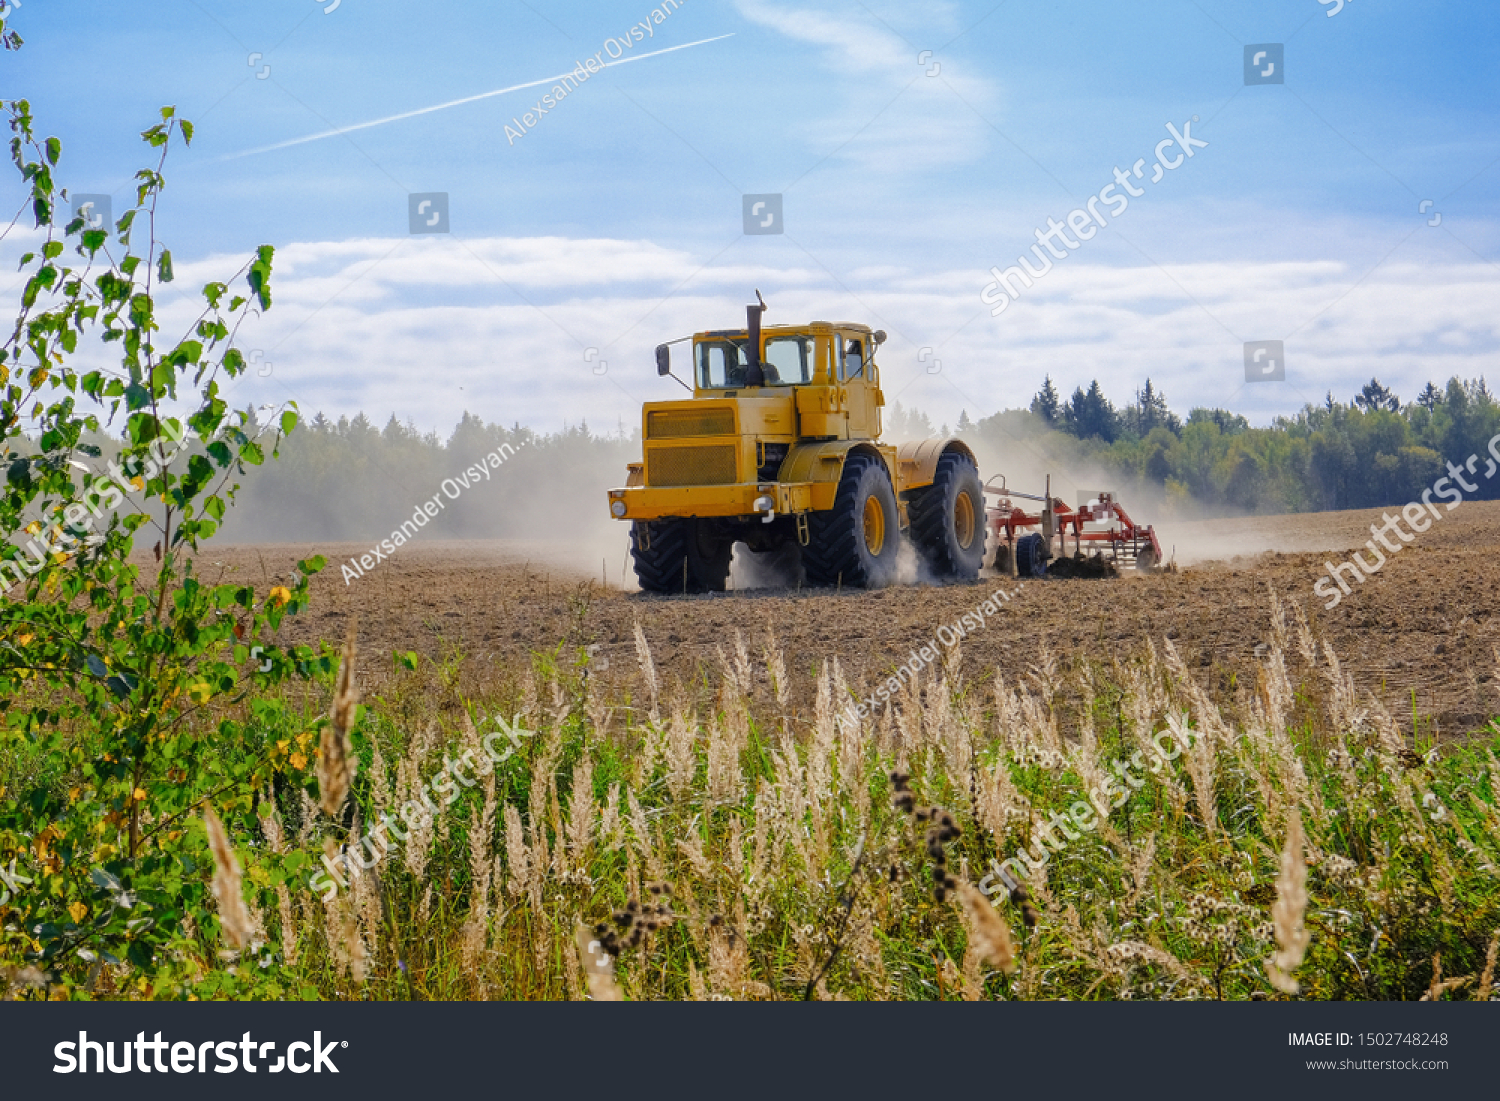 A farm tractor cultivates land after harvesting grain.  #1502748248